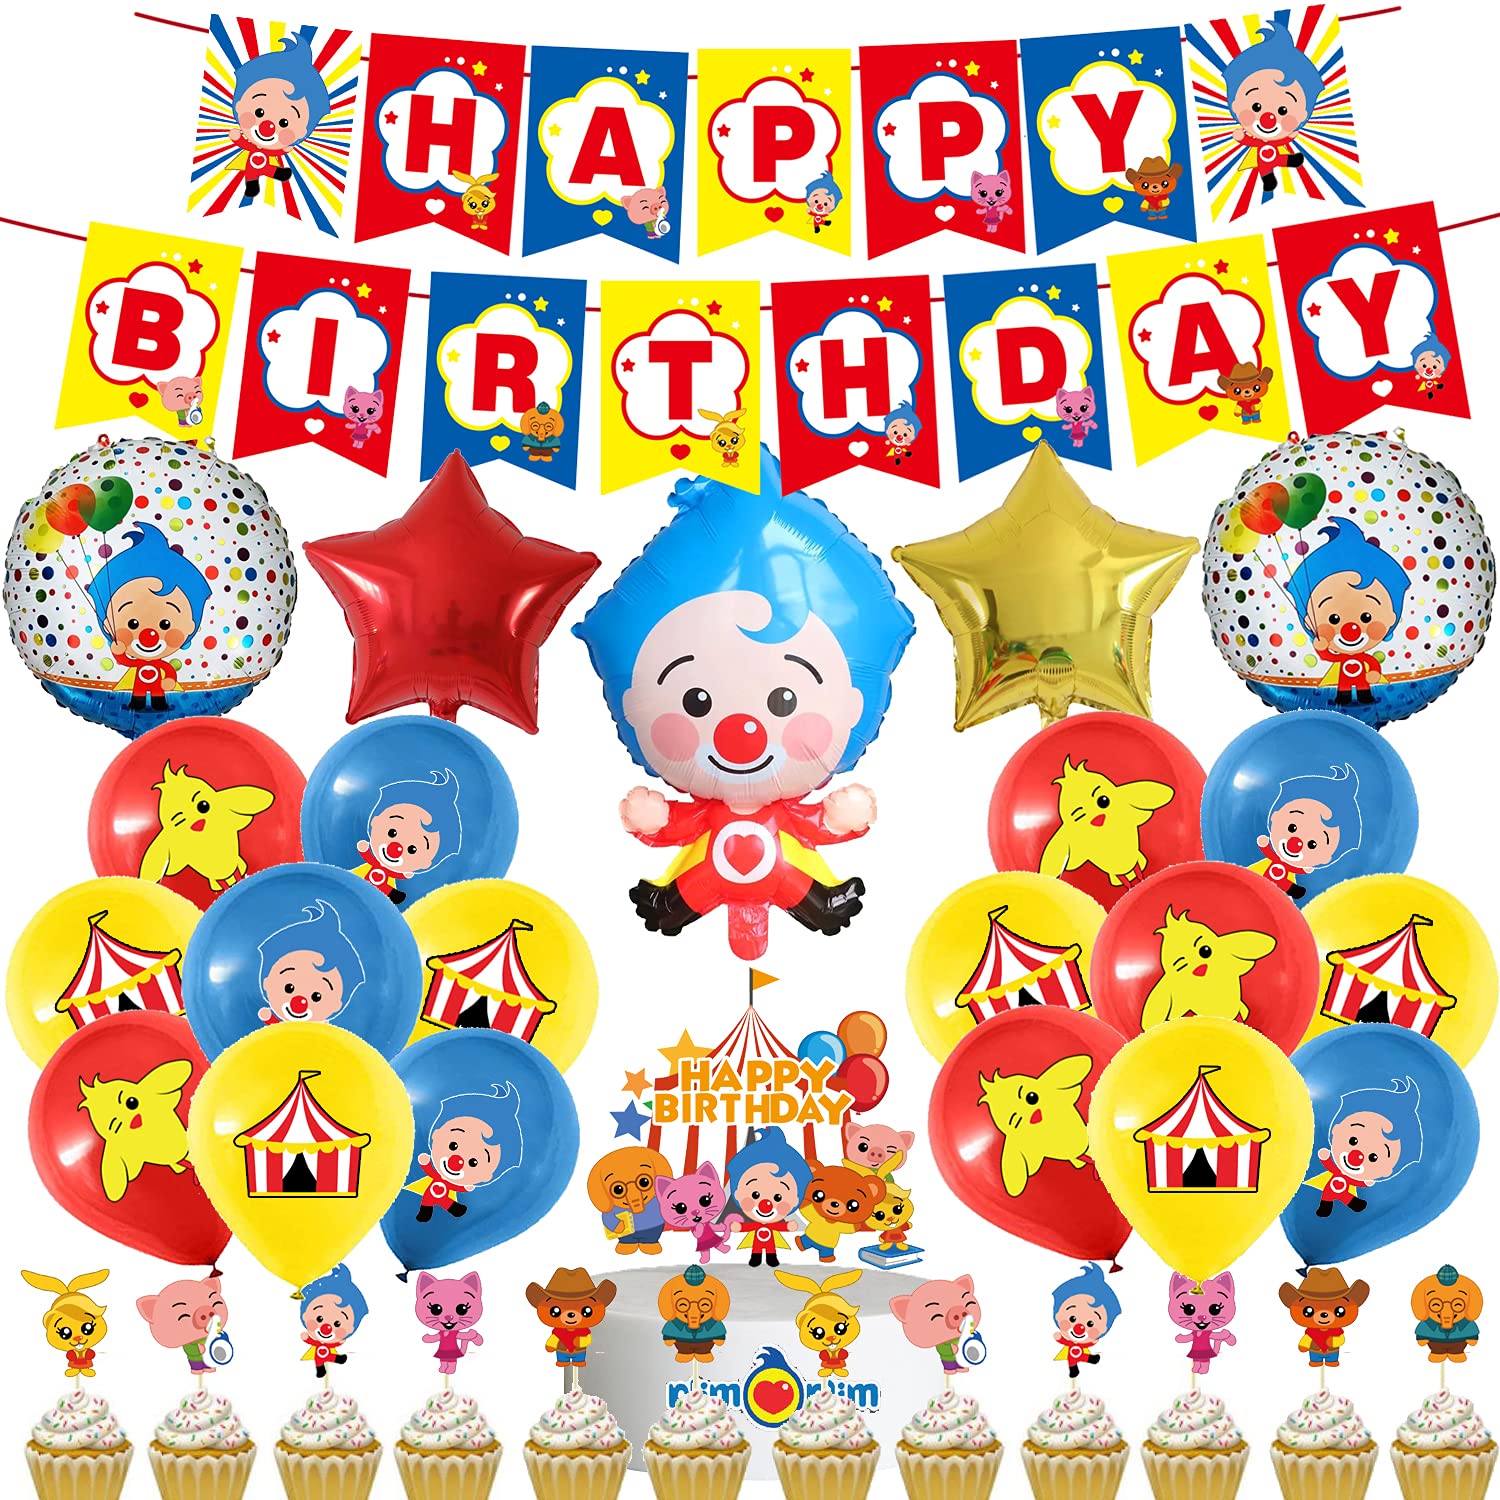 YNOU Clown Birthday Party Supplies Clown Theme Birthday Party decorations for Kids Teens with Happy Birthday Banner, Cake Topper, Cupcake Toppers, Balloons for Clown Party Decorations